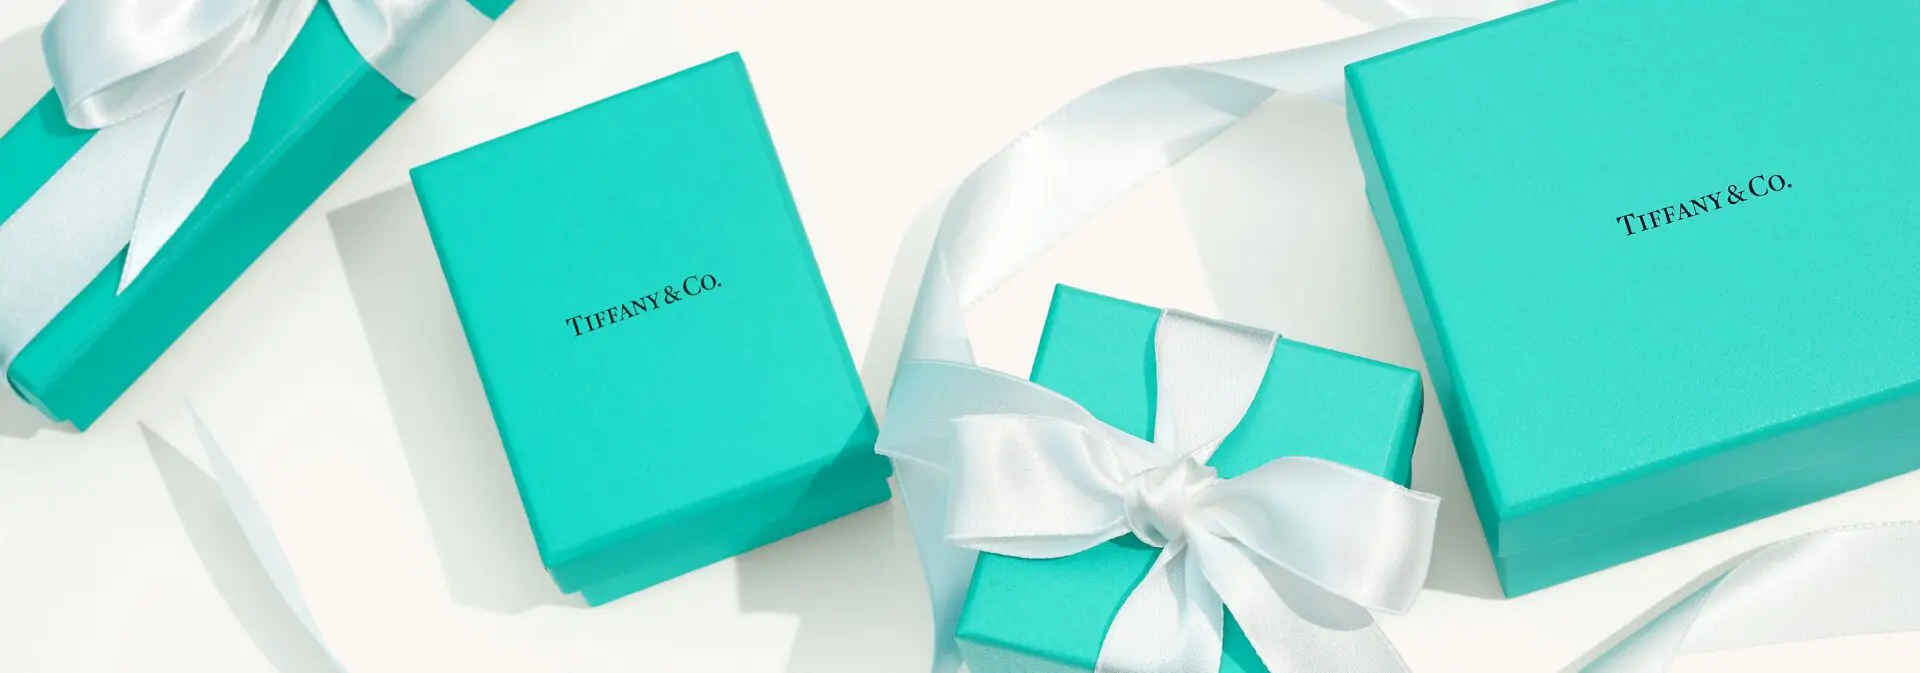 After marketing blitz, Tiffany's upgrade pivots to stores